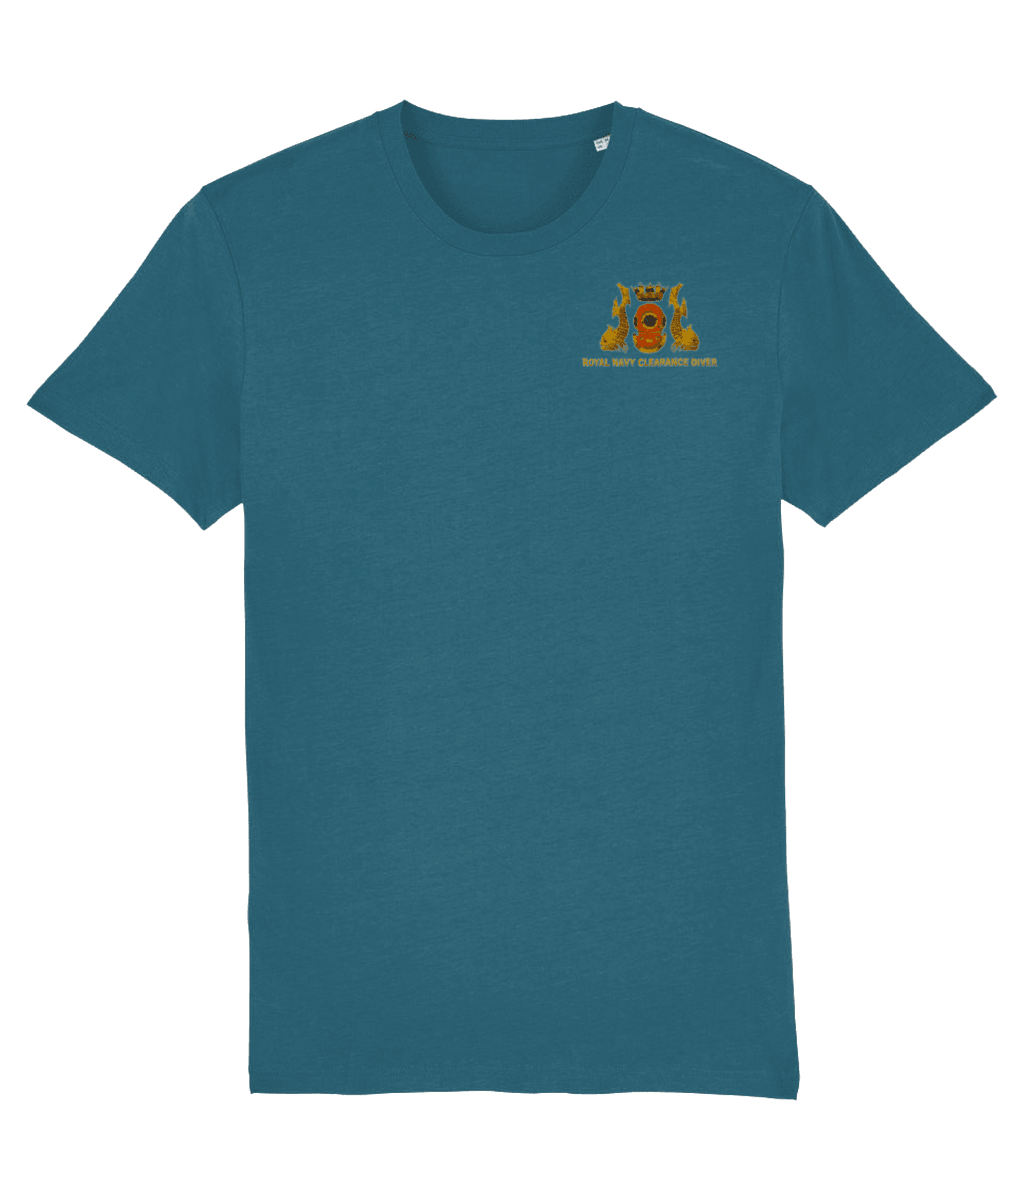 Royal Navy Clearance Diver - Embroidered T-Shirt - Divers Gifts